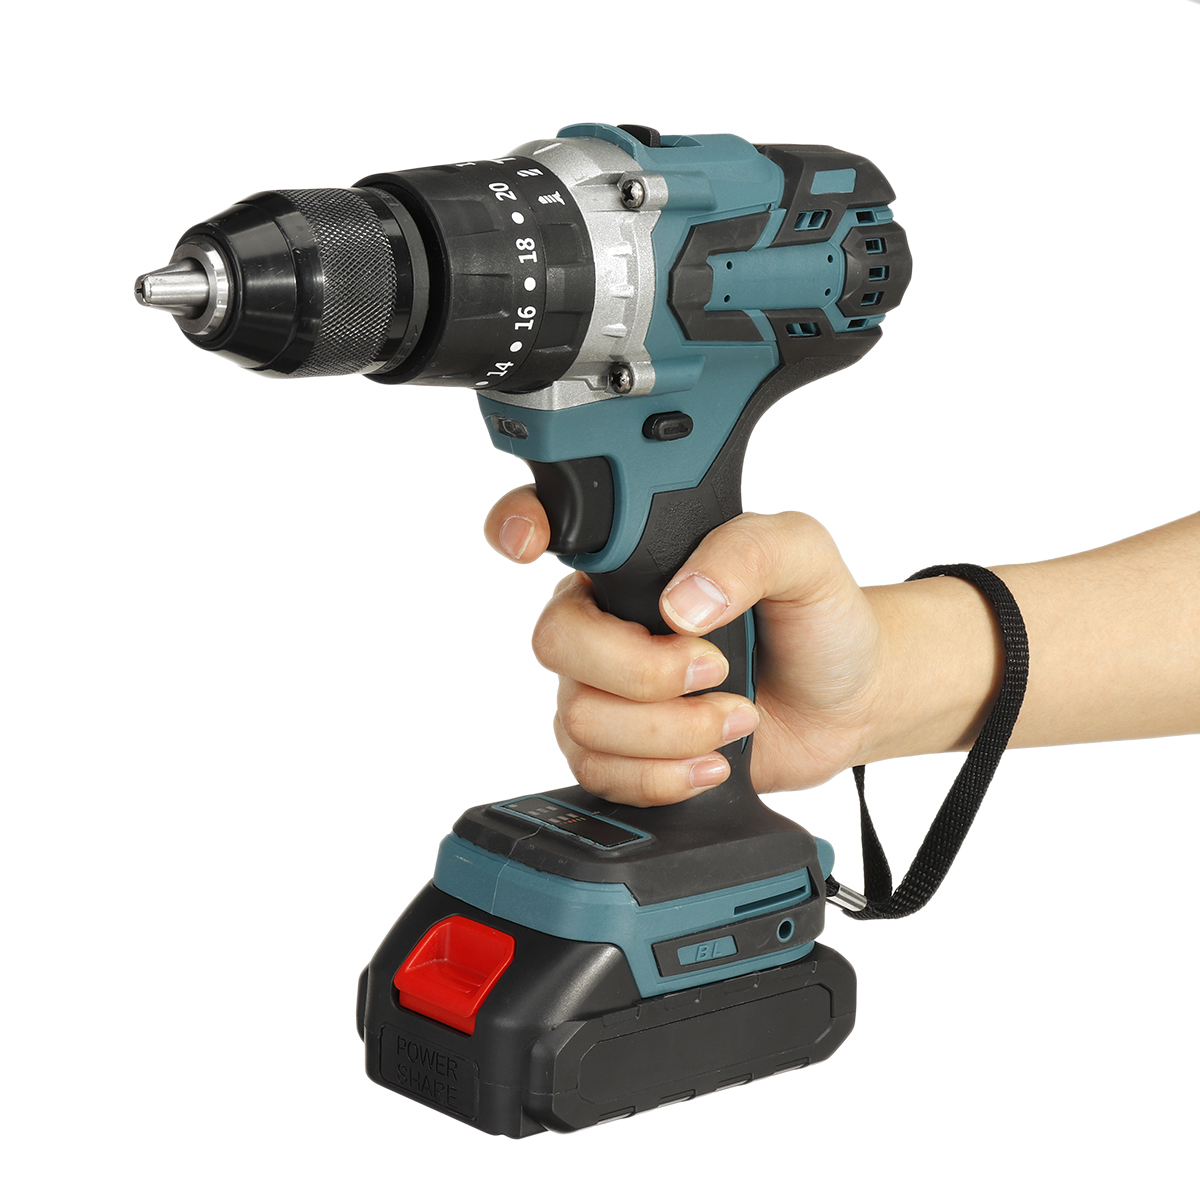 Cordless-Electric-Impact-Drill-3-in-1-Rechargeable-Drill-Screwdriver-13mm-Chuck-W-1-or-2-Li-ion-Batt-1803323-13